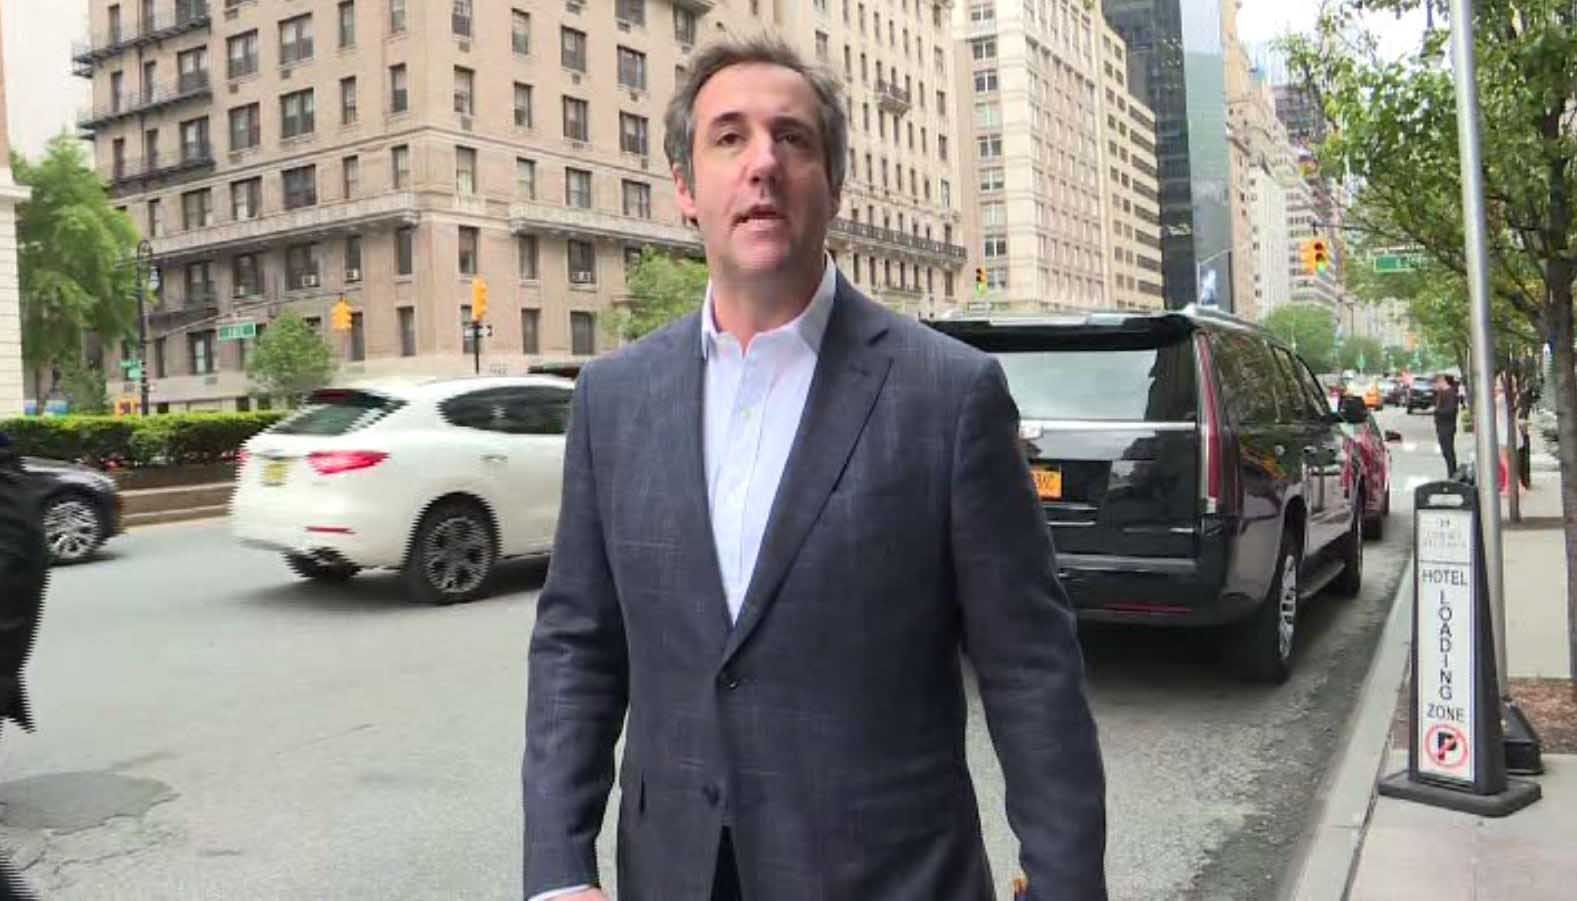 Cohen partner pleads guilty in deal requiring cooperation